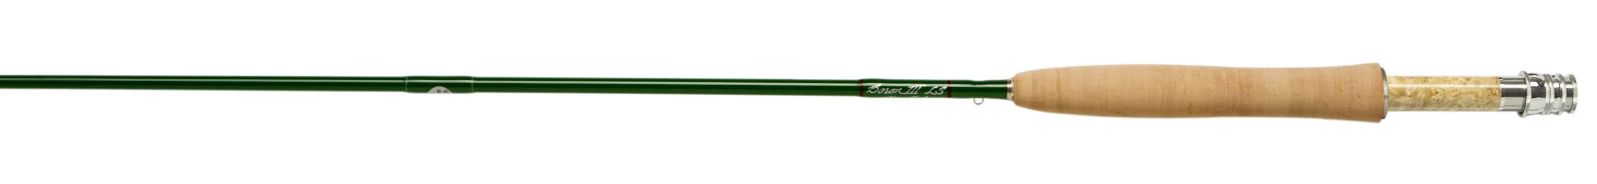 R.L. Winston Boron III LS Fly Rod 8 ft. 6 in. 4 Wt. TackleDirect